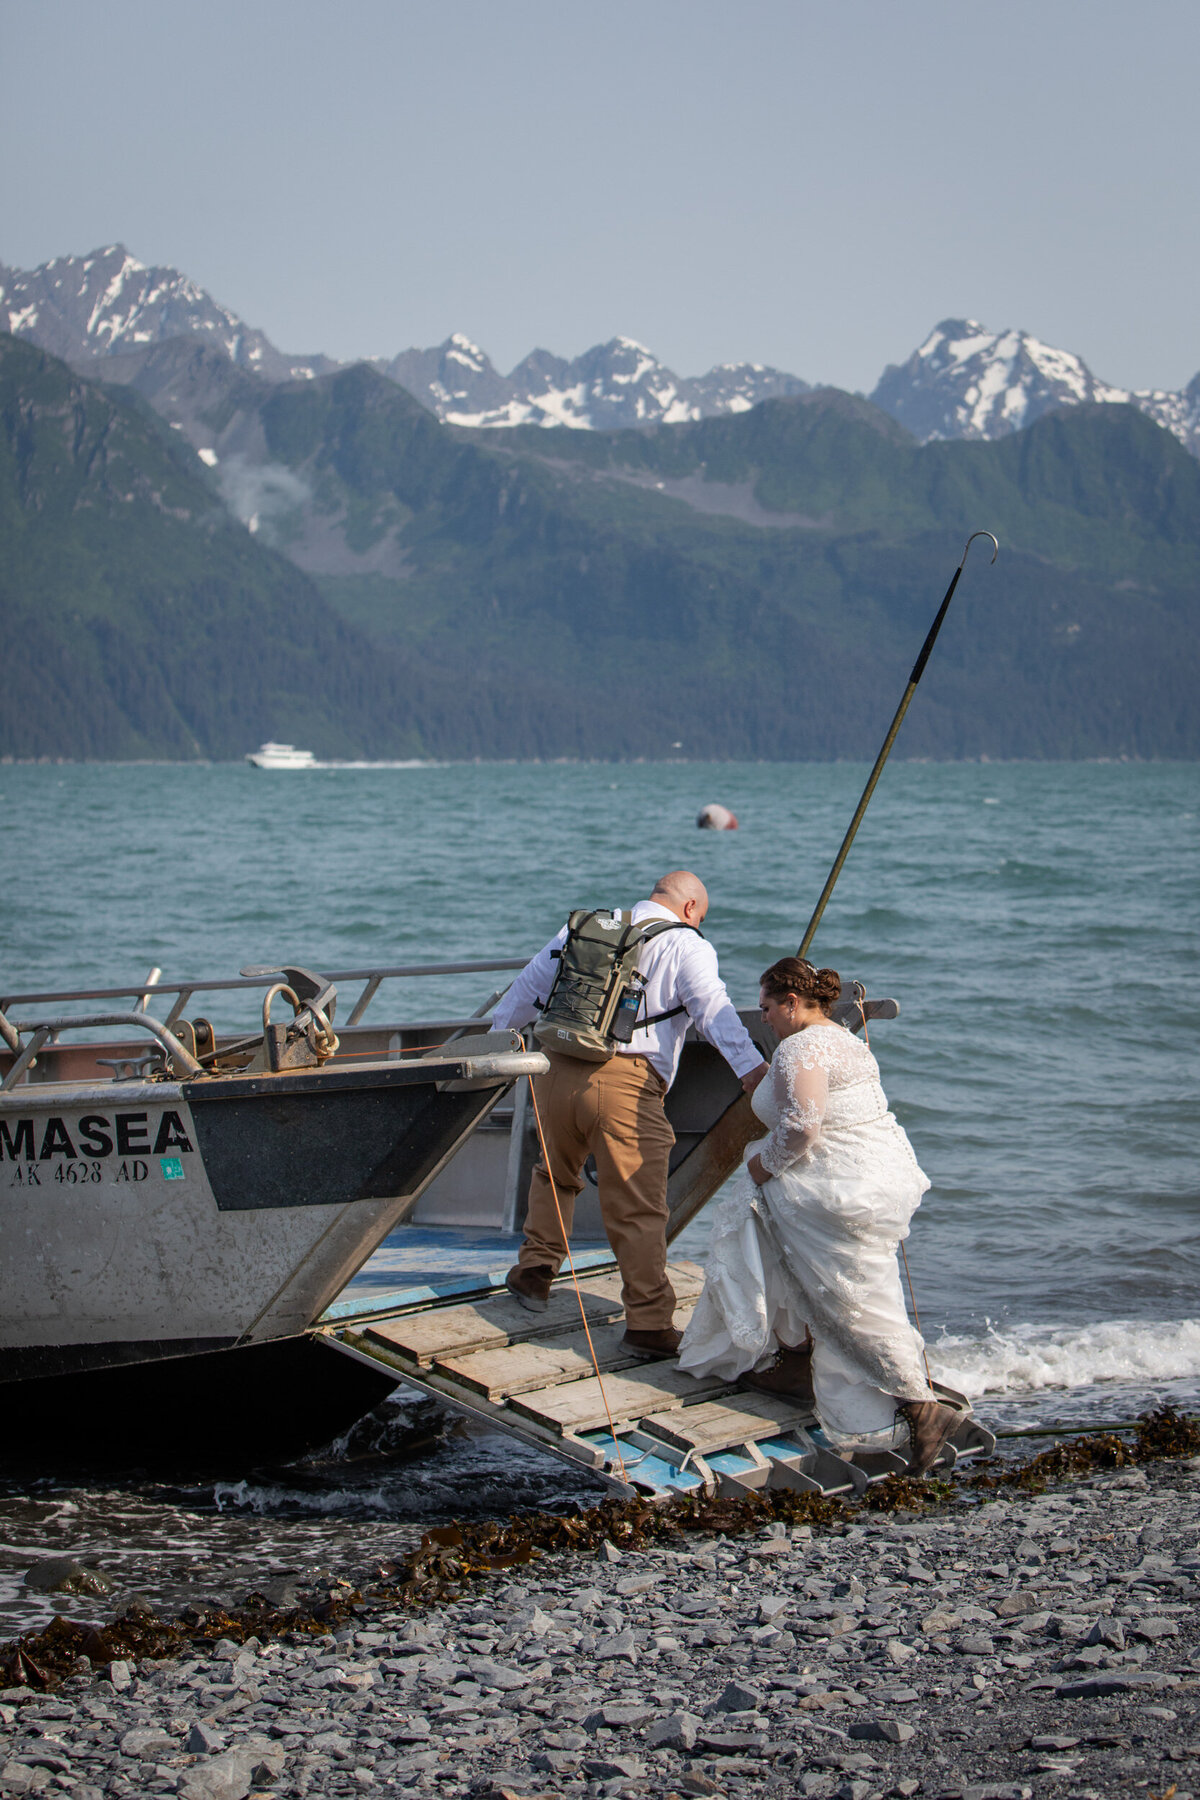 A groom reaches out to help his bride climb onto a boat in Alaska.